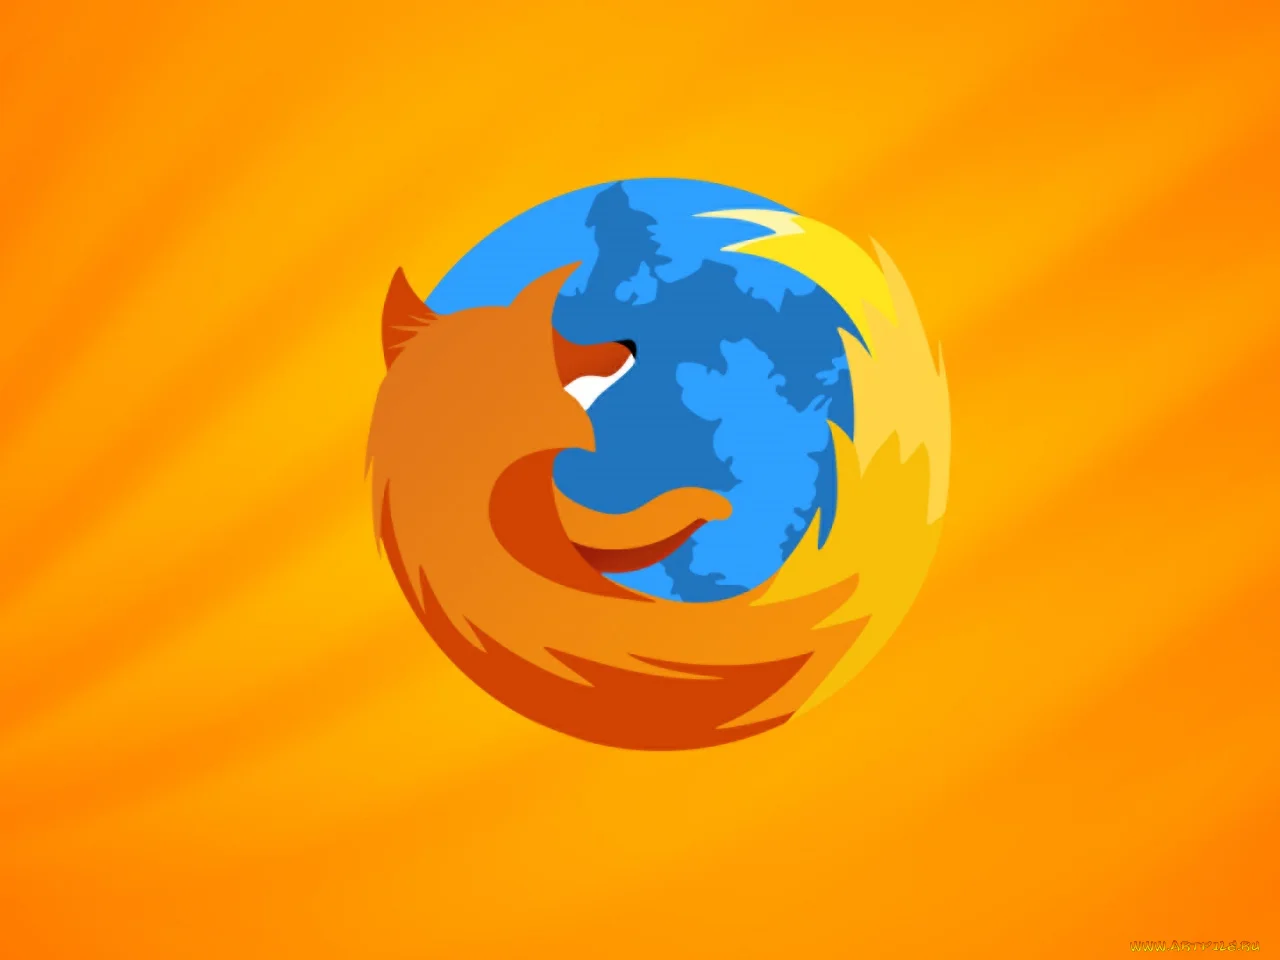 New version of Mozilla Firefox browser for Windows and Linux released